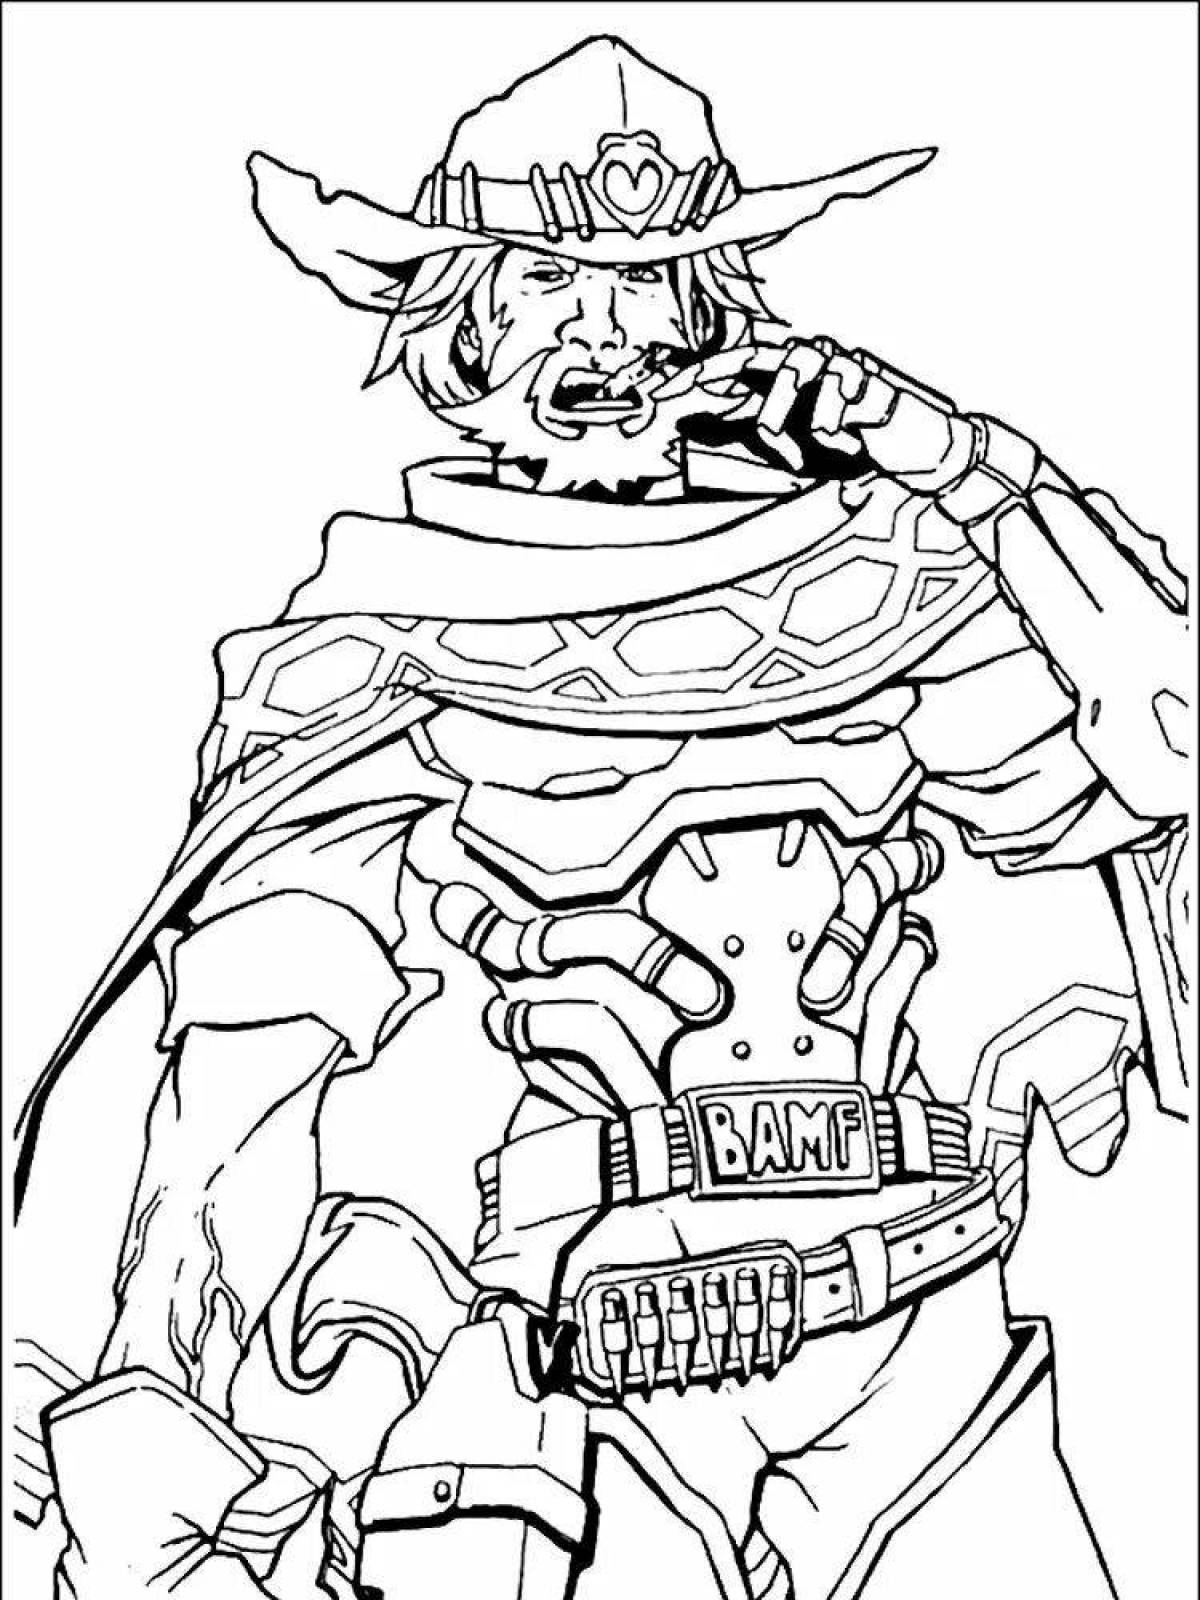 Creative game character coloring pages